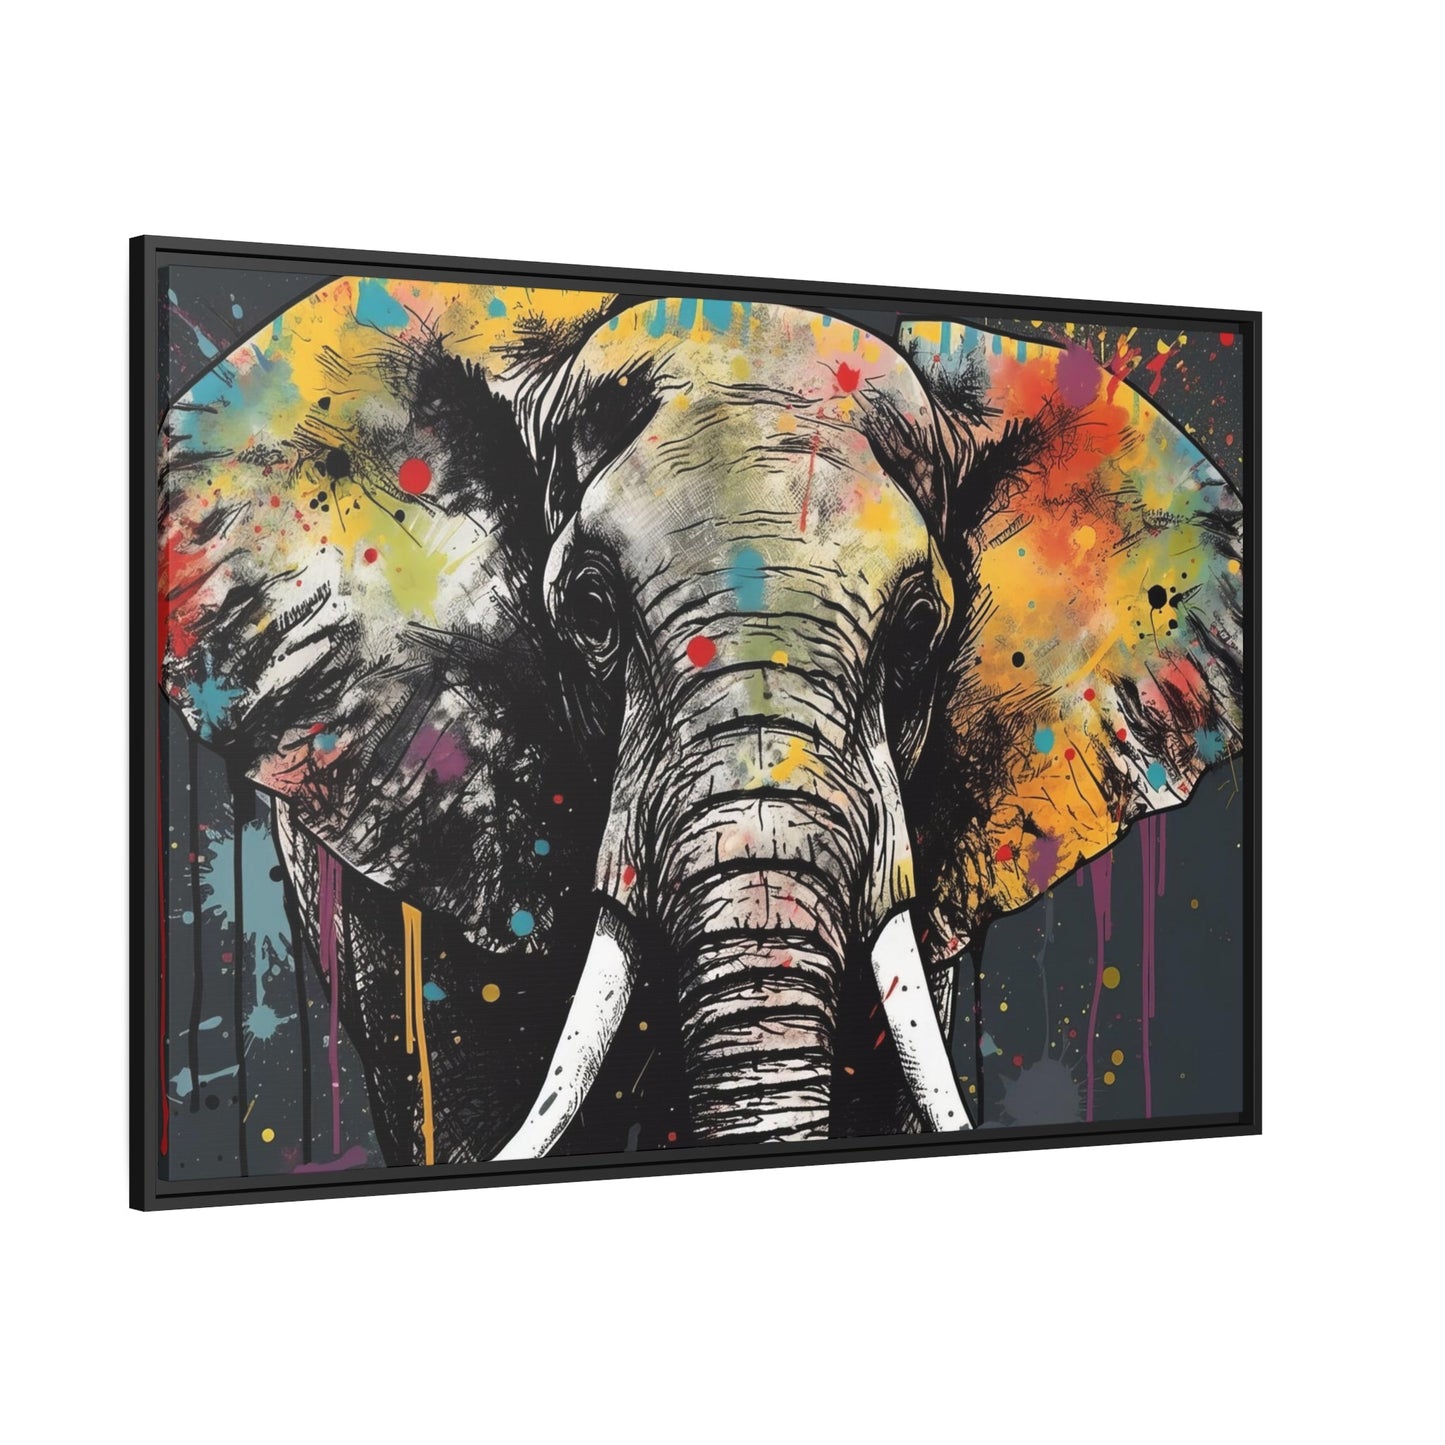 The Graceful Giant: Framed Poster Featuring an Elegant Elephant